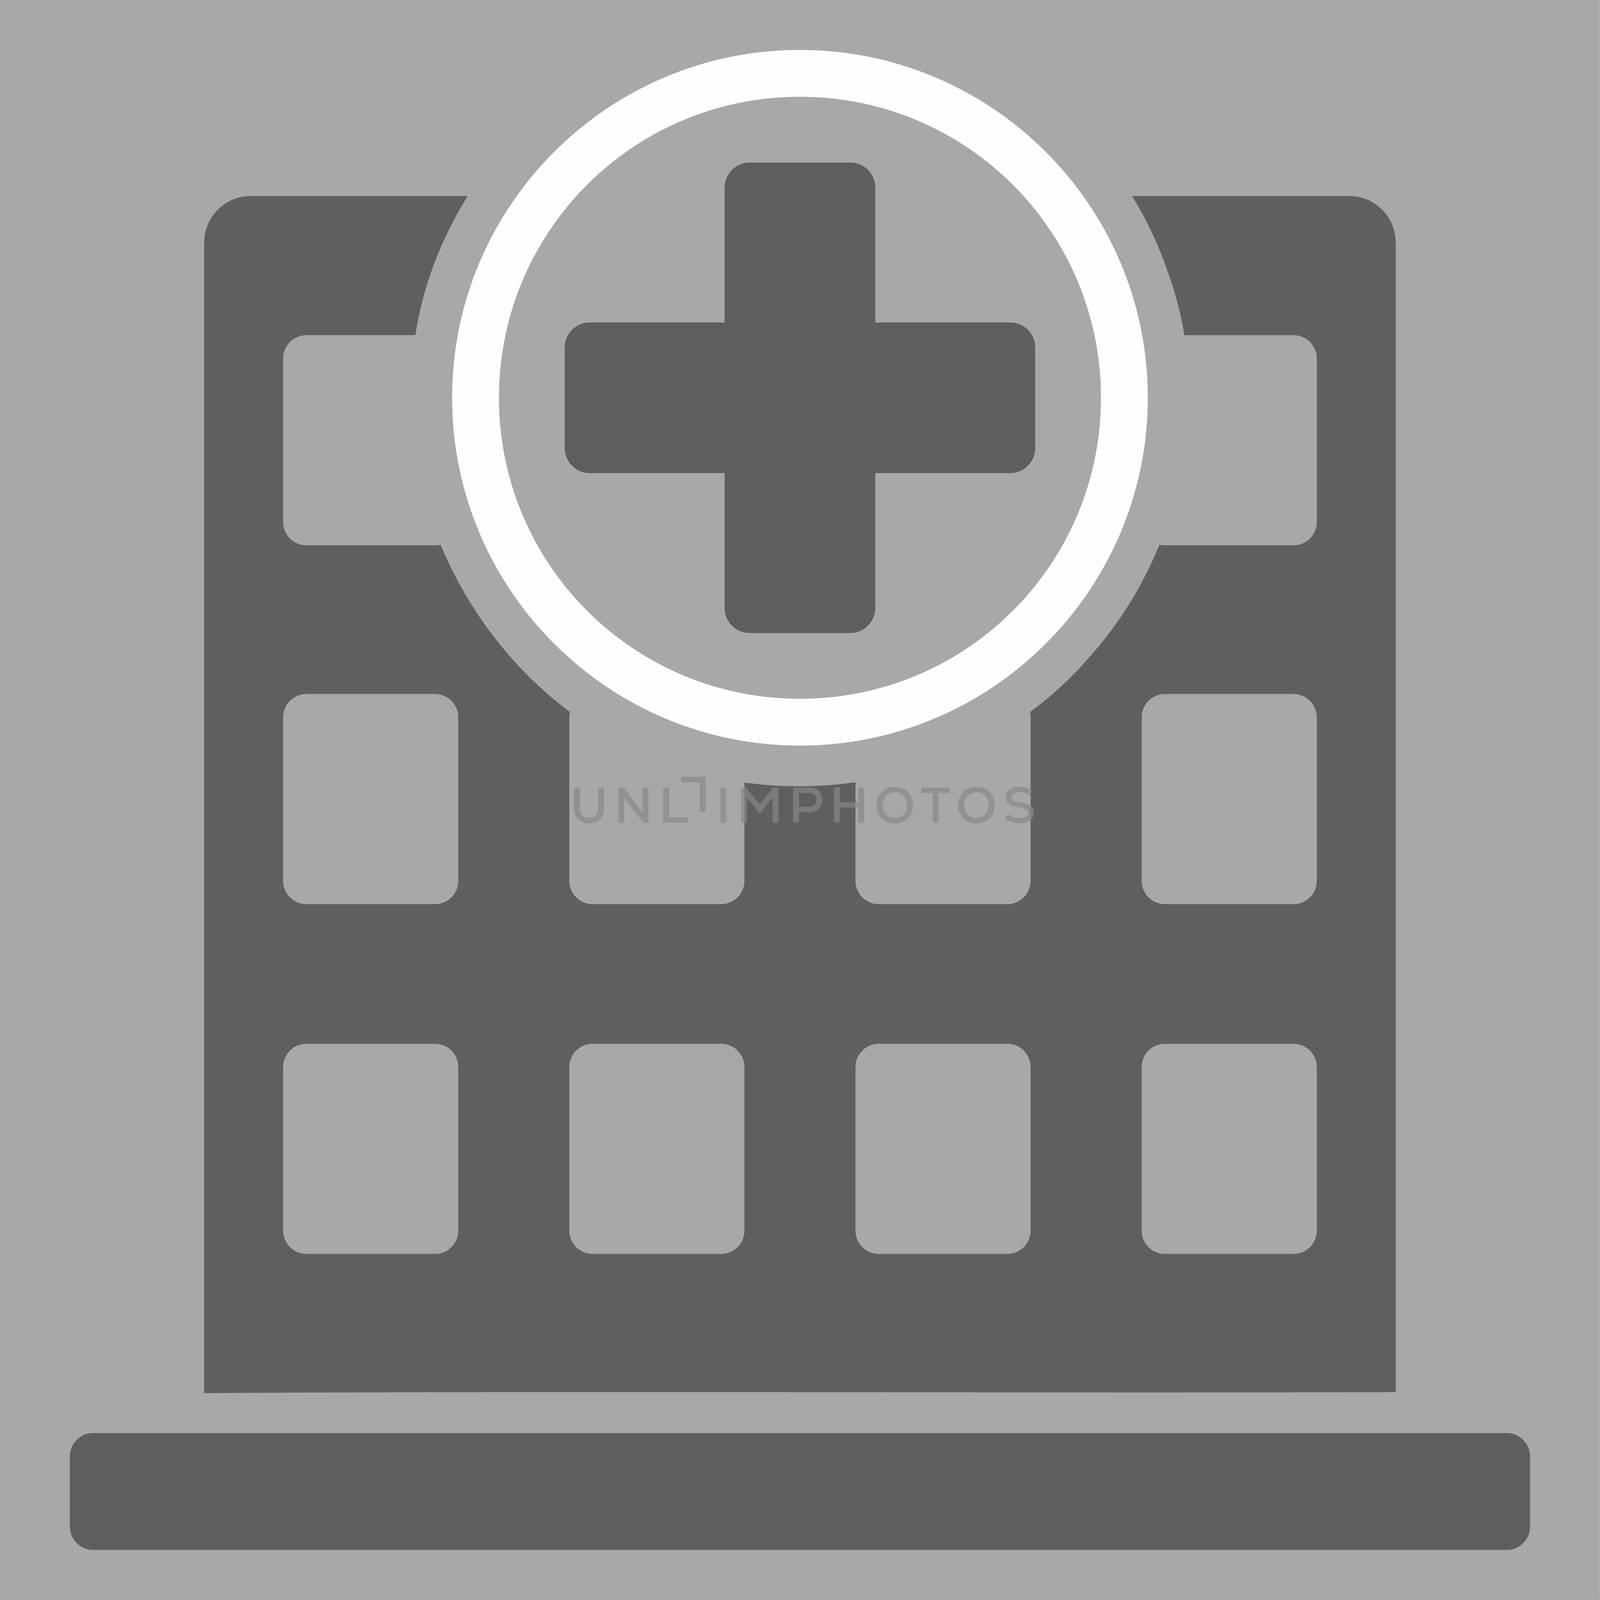 Clinic Building raster icon. Style is bicolor flat symbol, dark gray and white colors, rounded angles, silver background.